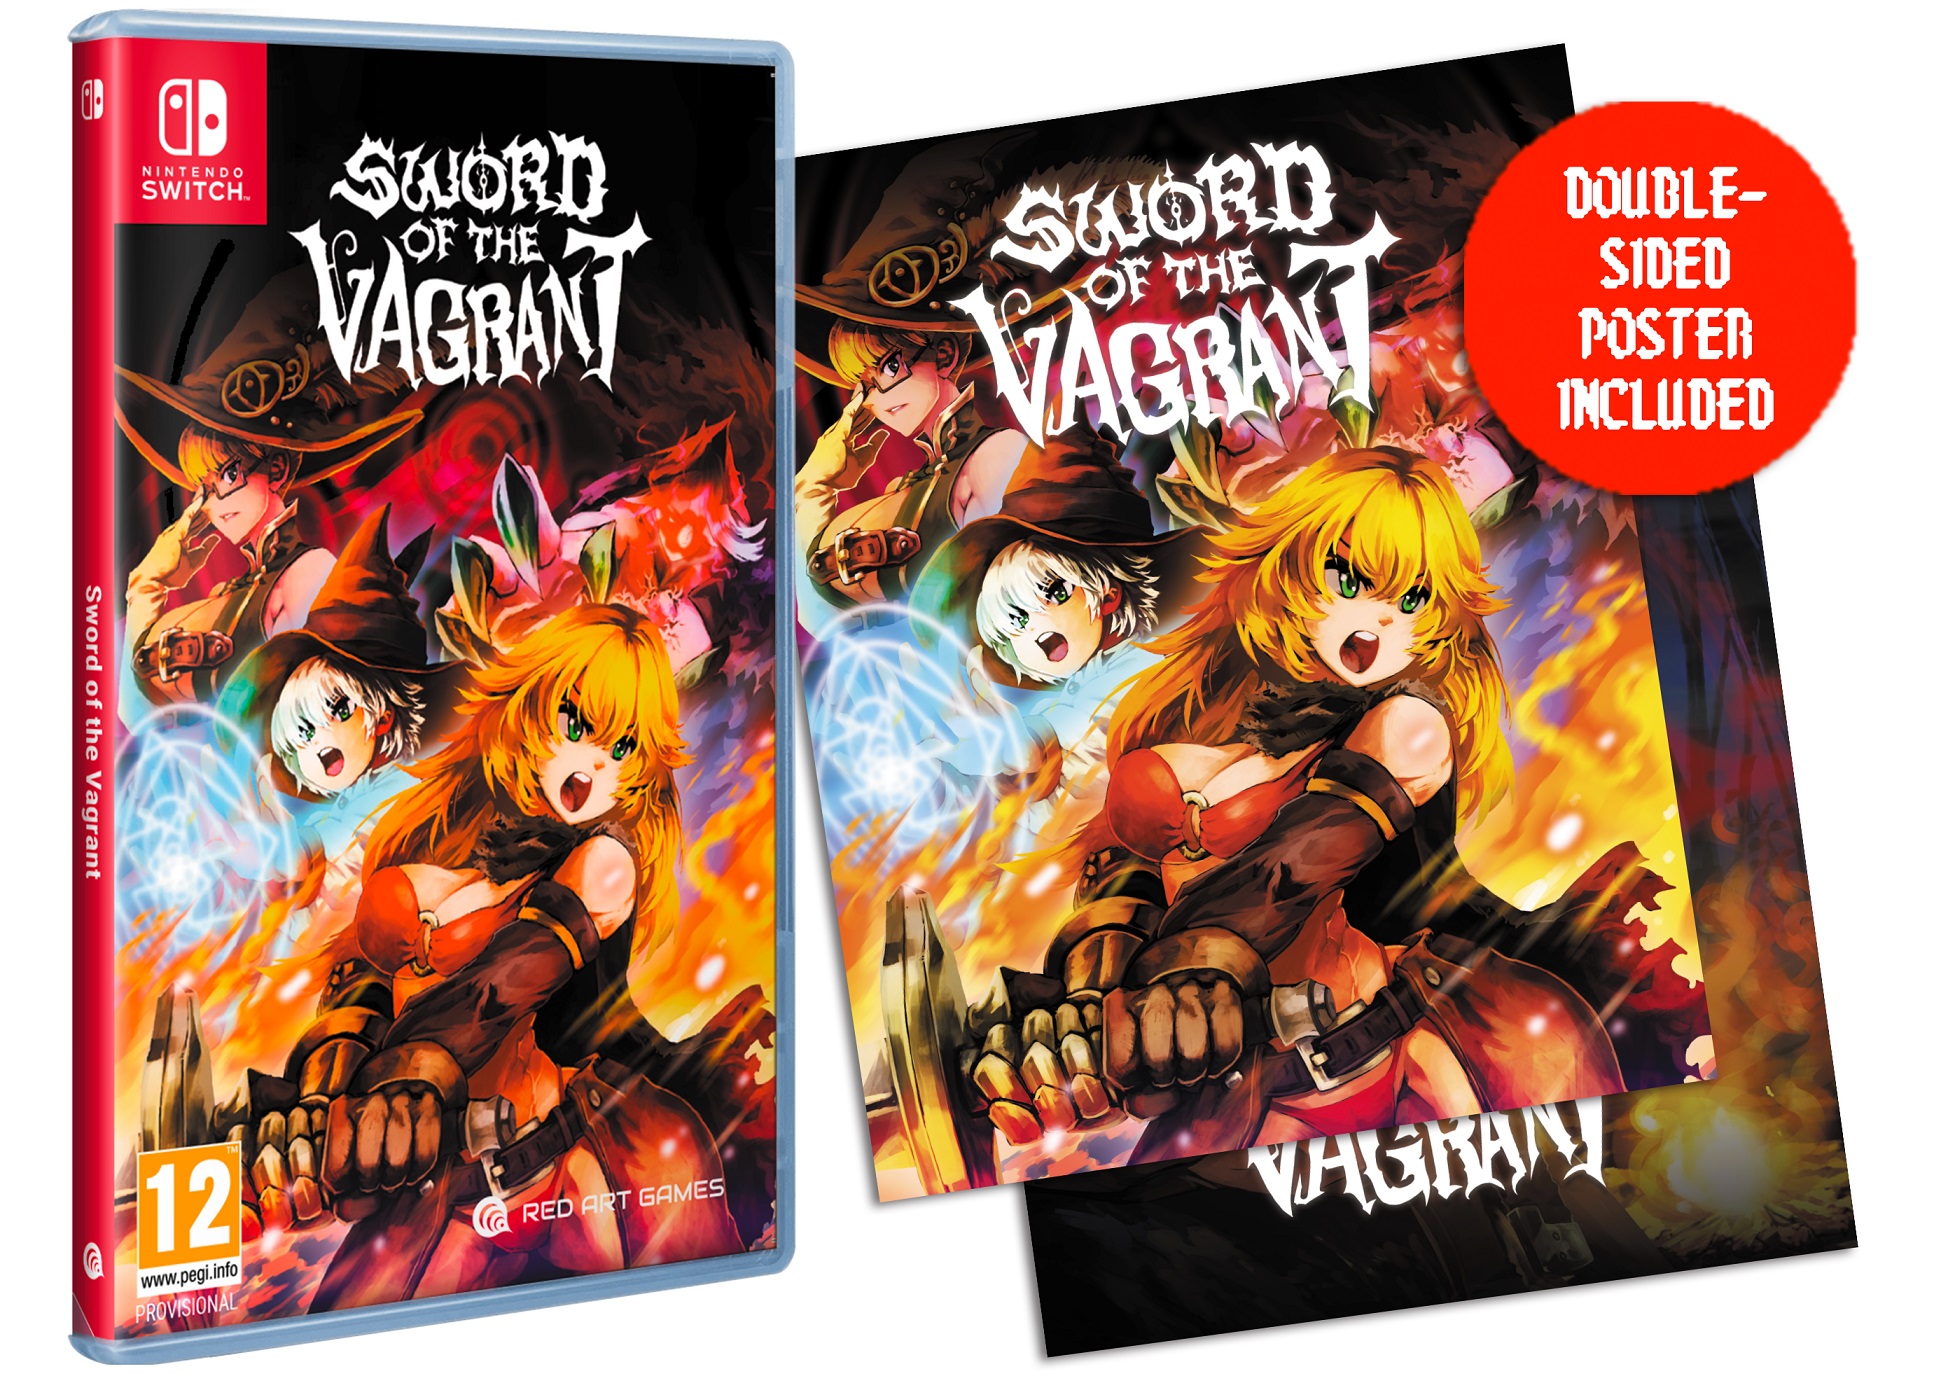 Sword of the Vagrant 2